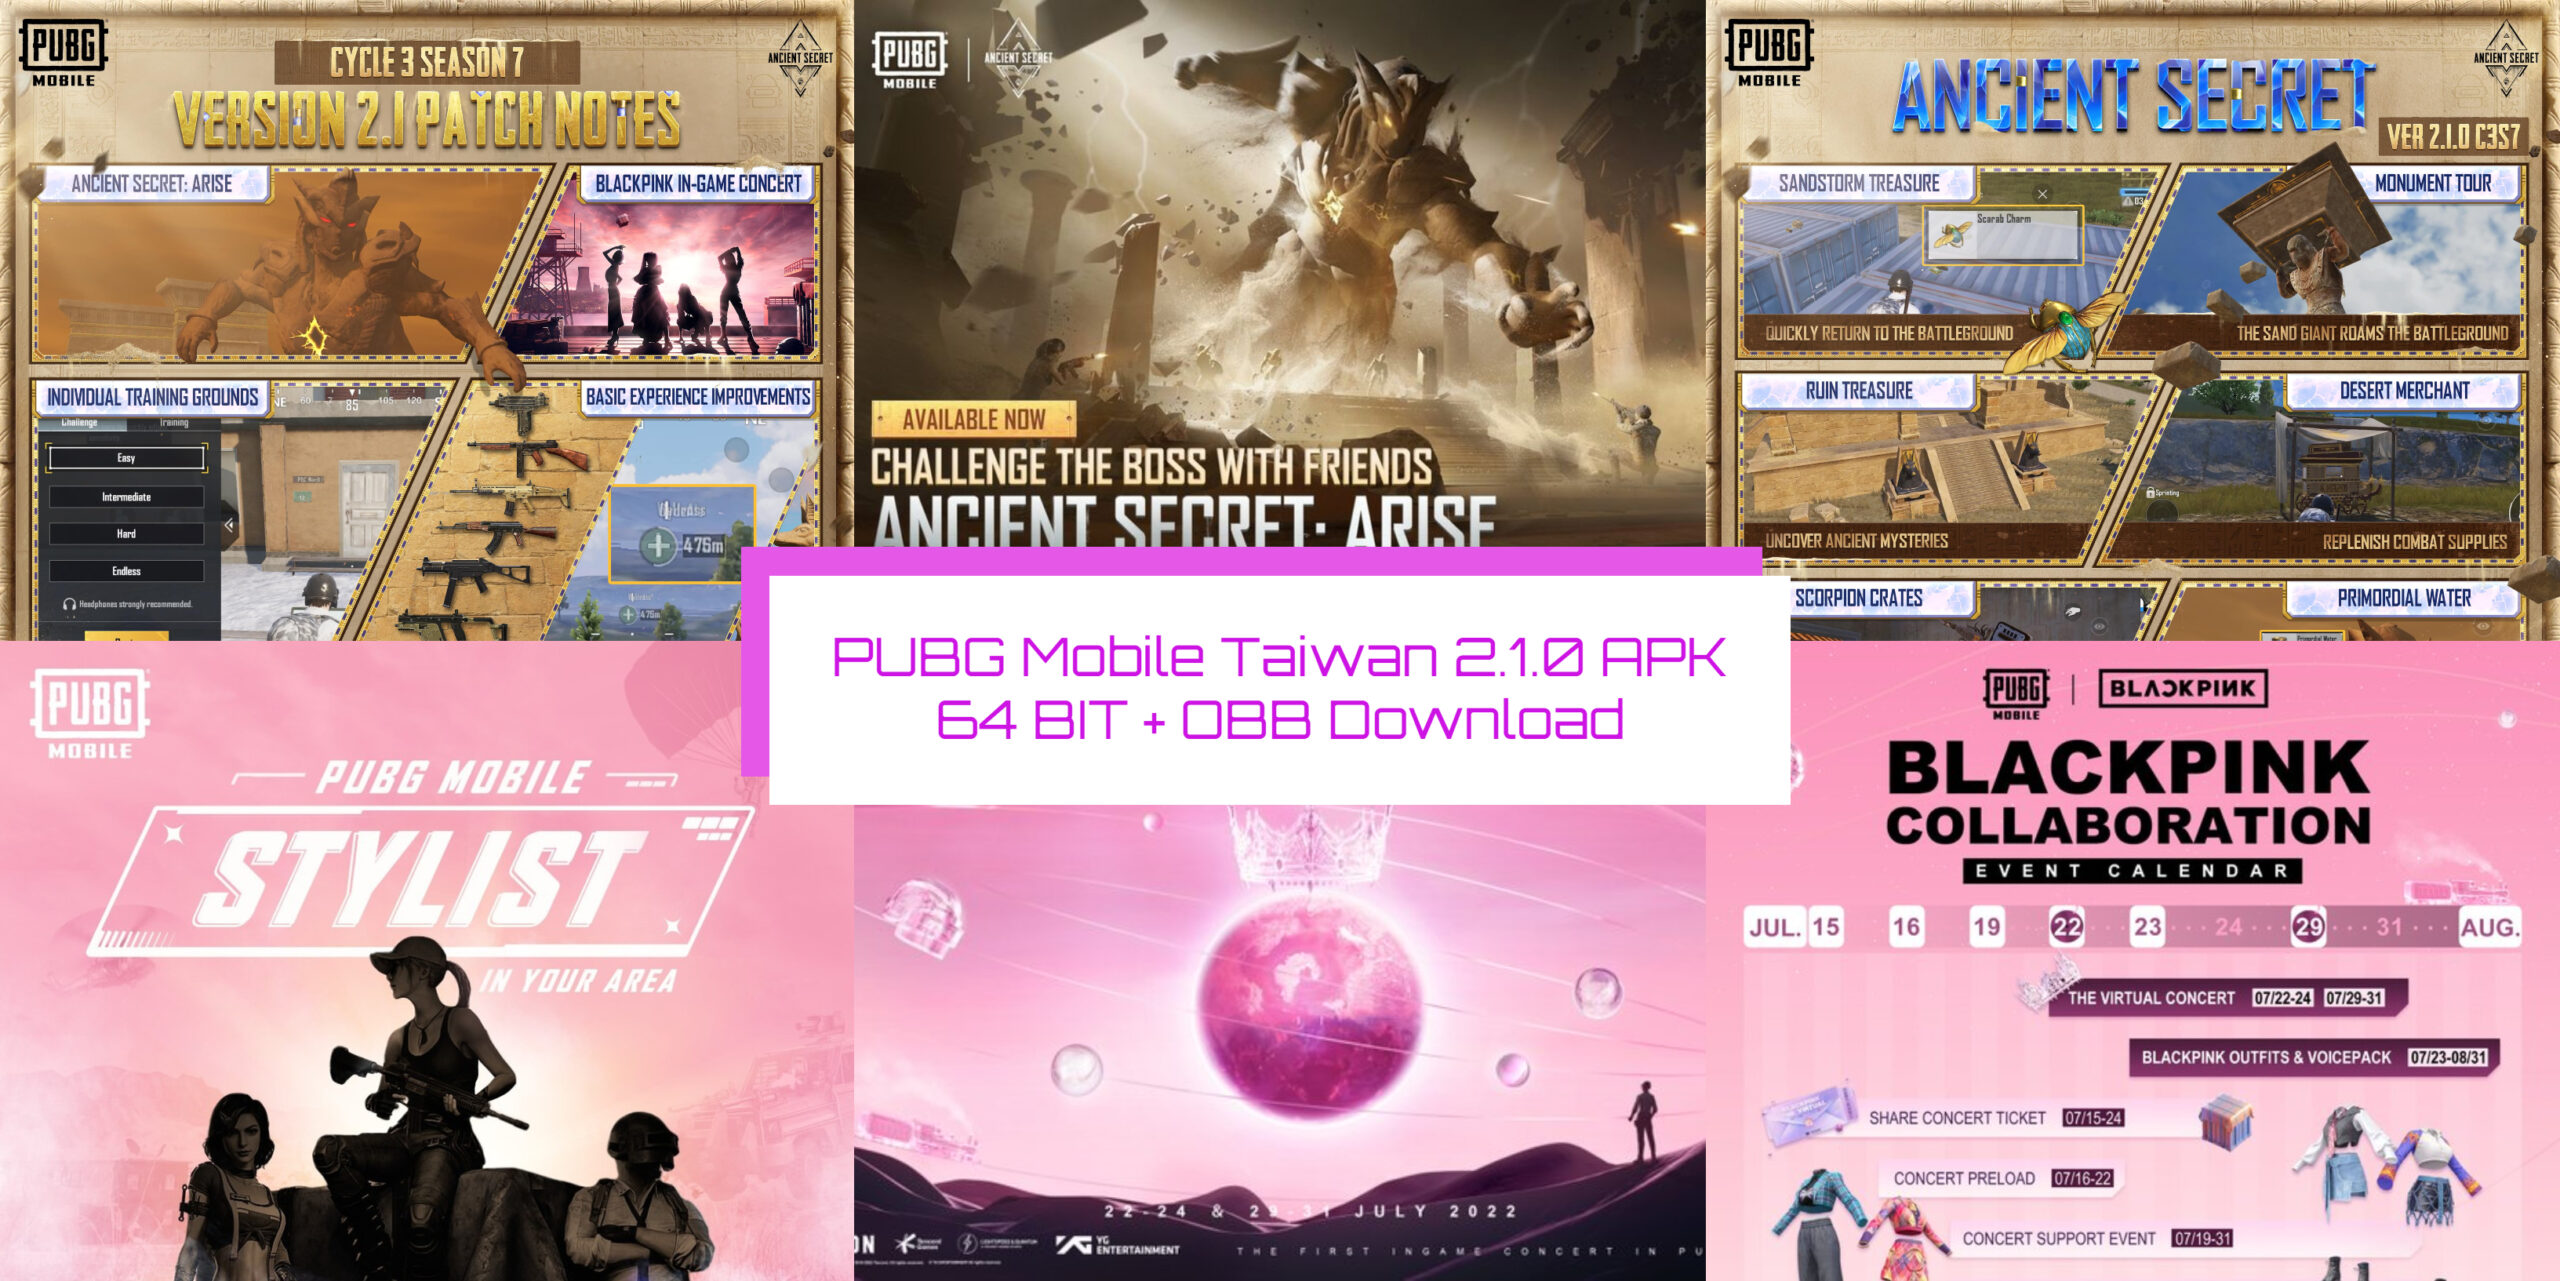 You are currently viewing PUBG Mobile Taiwan 2.1 APK 64 BIT + OBB Download